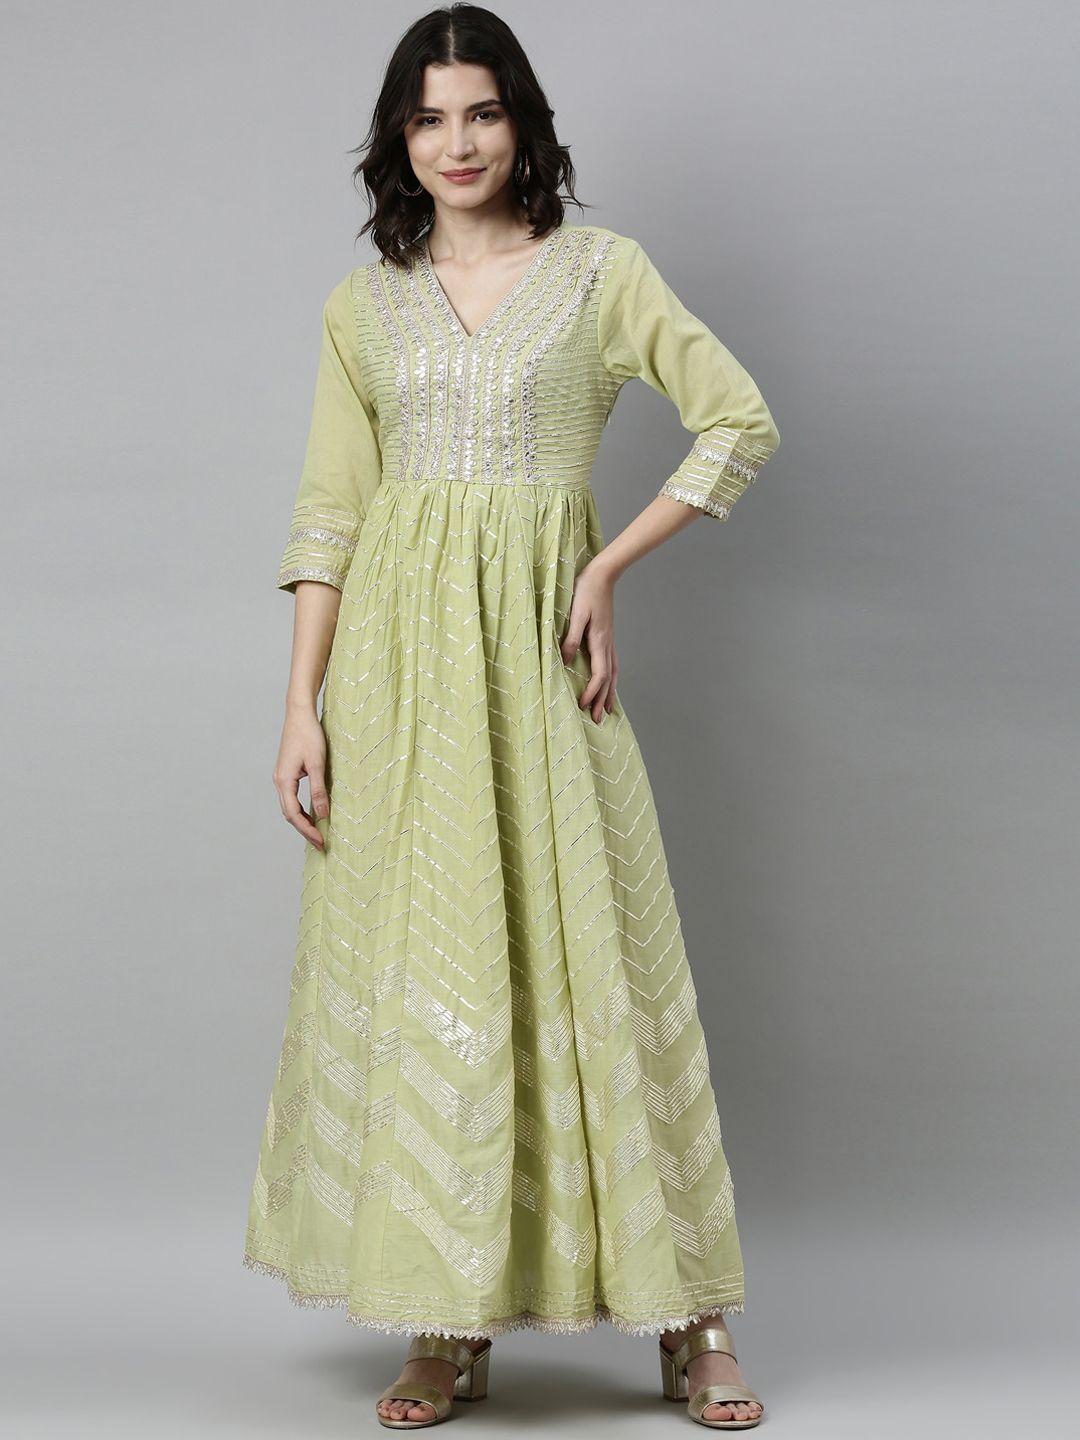 neerus olive green floral embroidered ethnic cotton maxi dress